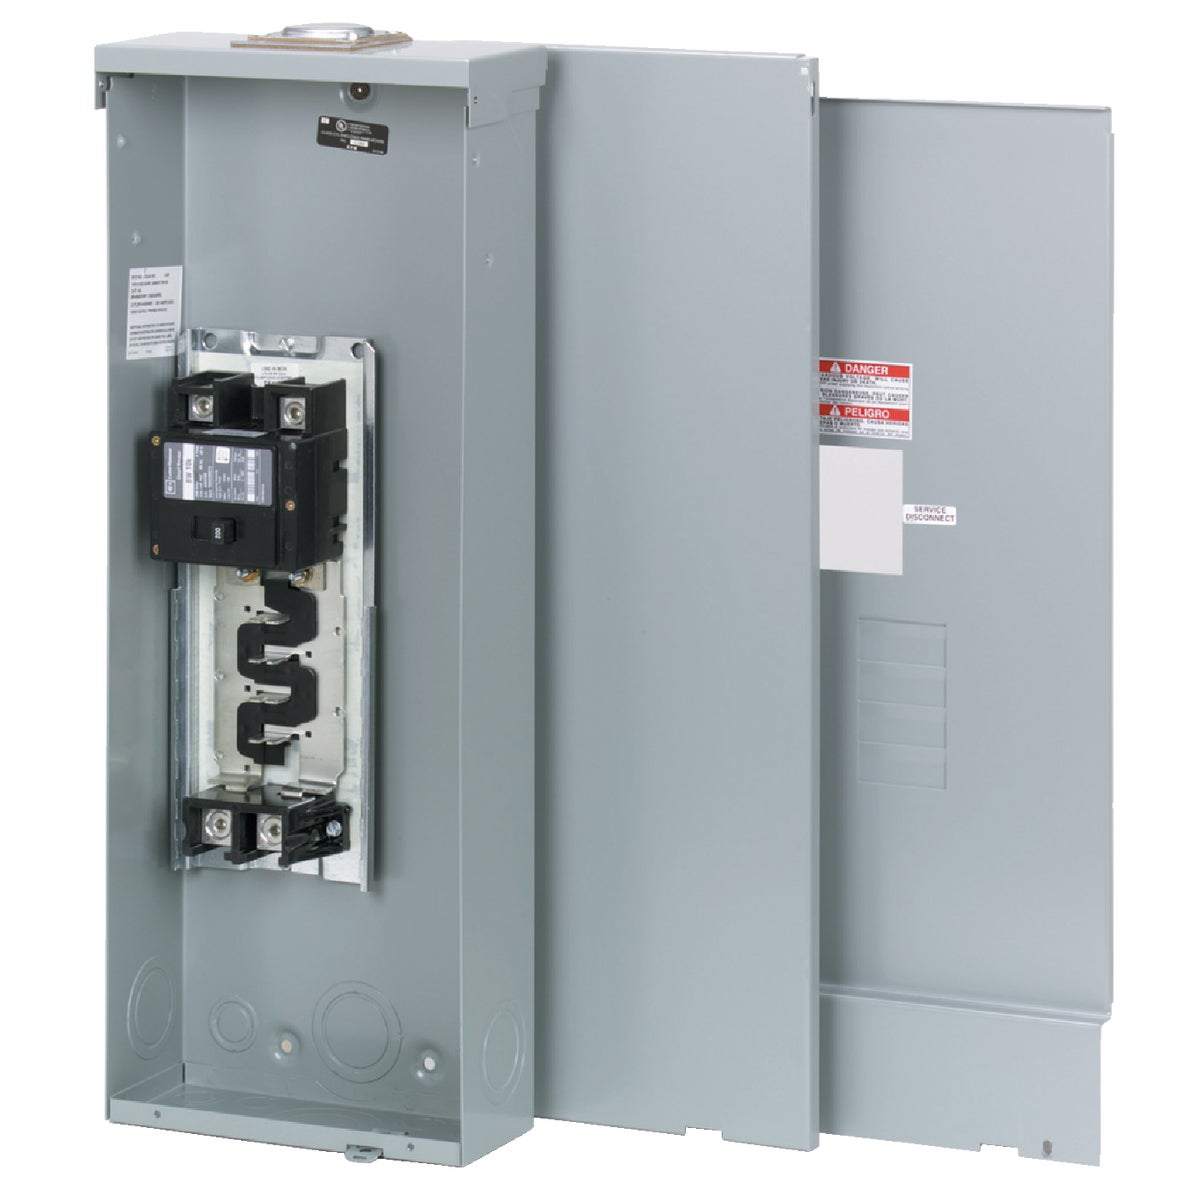 Item 562459, 200A main breaker type BR load center. 4-space, 8-circuit capacity.